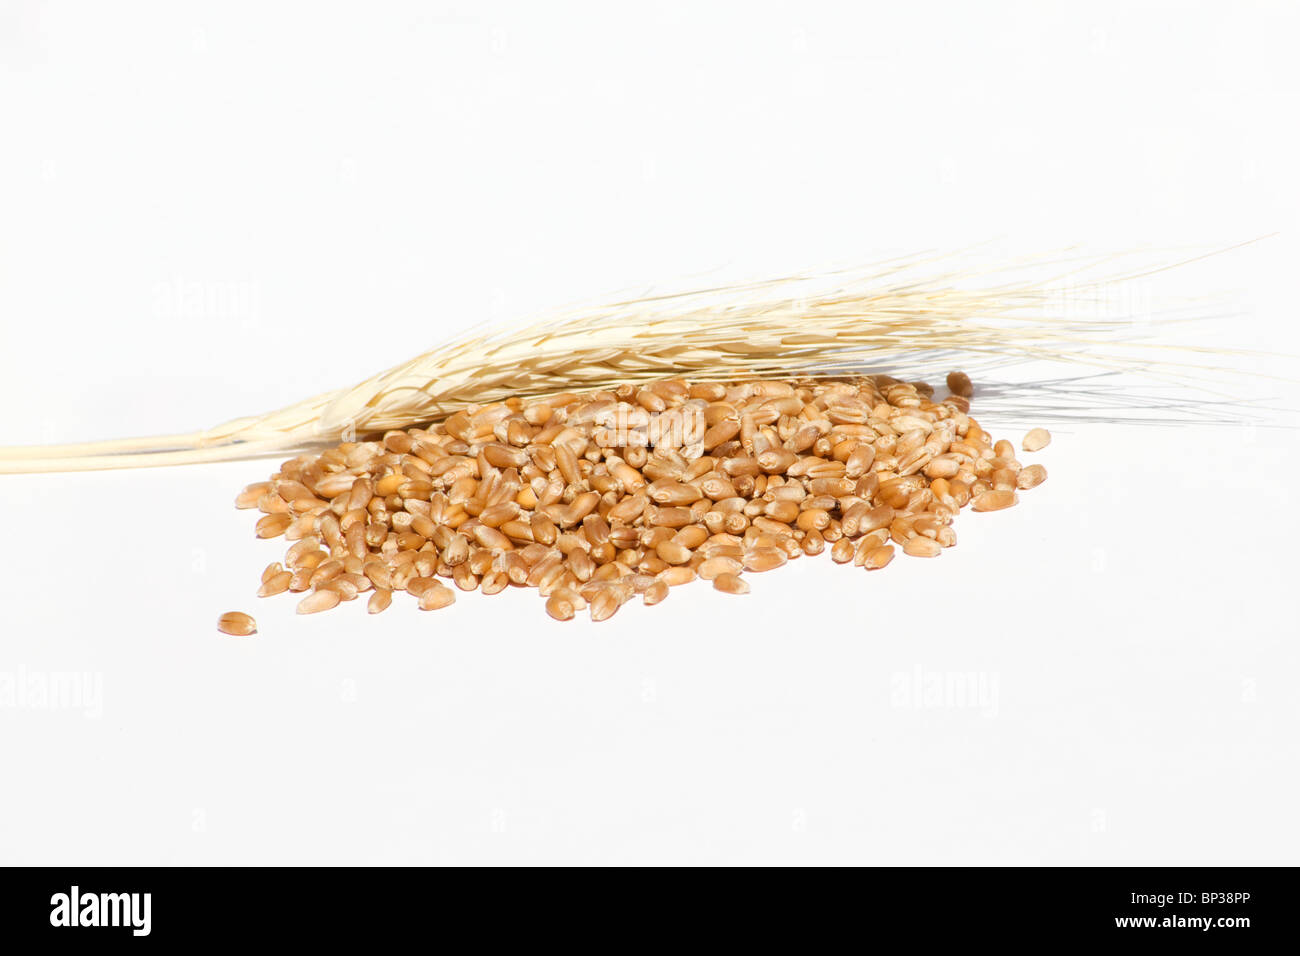 Close-up of wheat grain and wheat stalks on white background Stock Photo